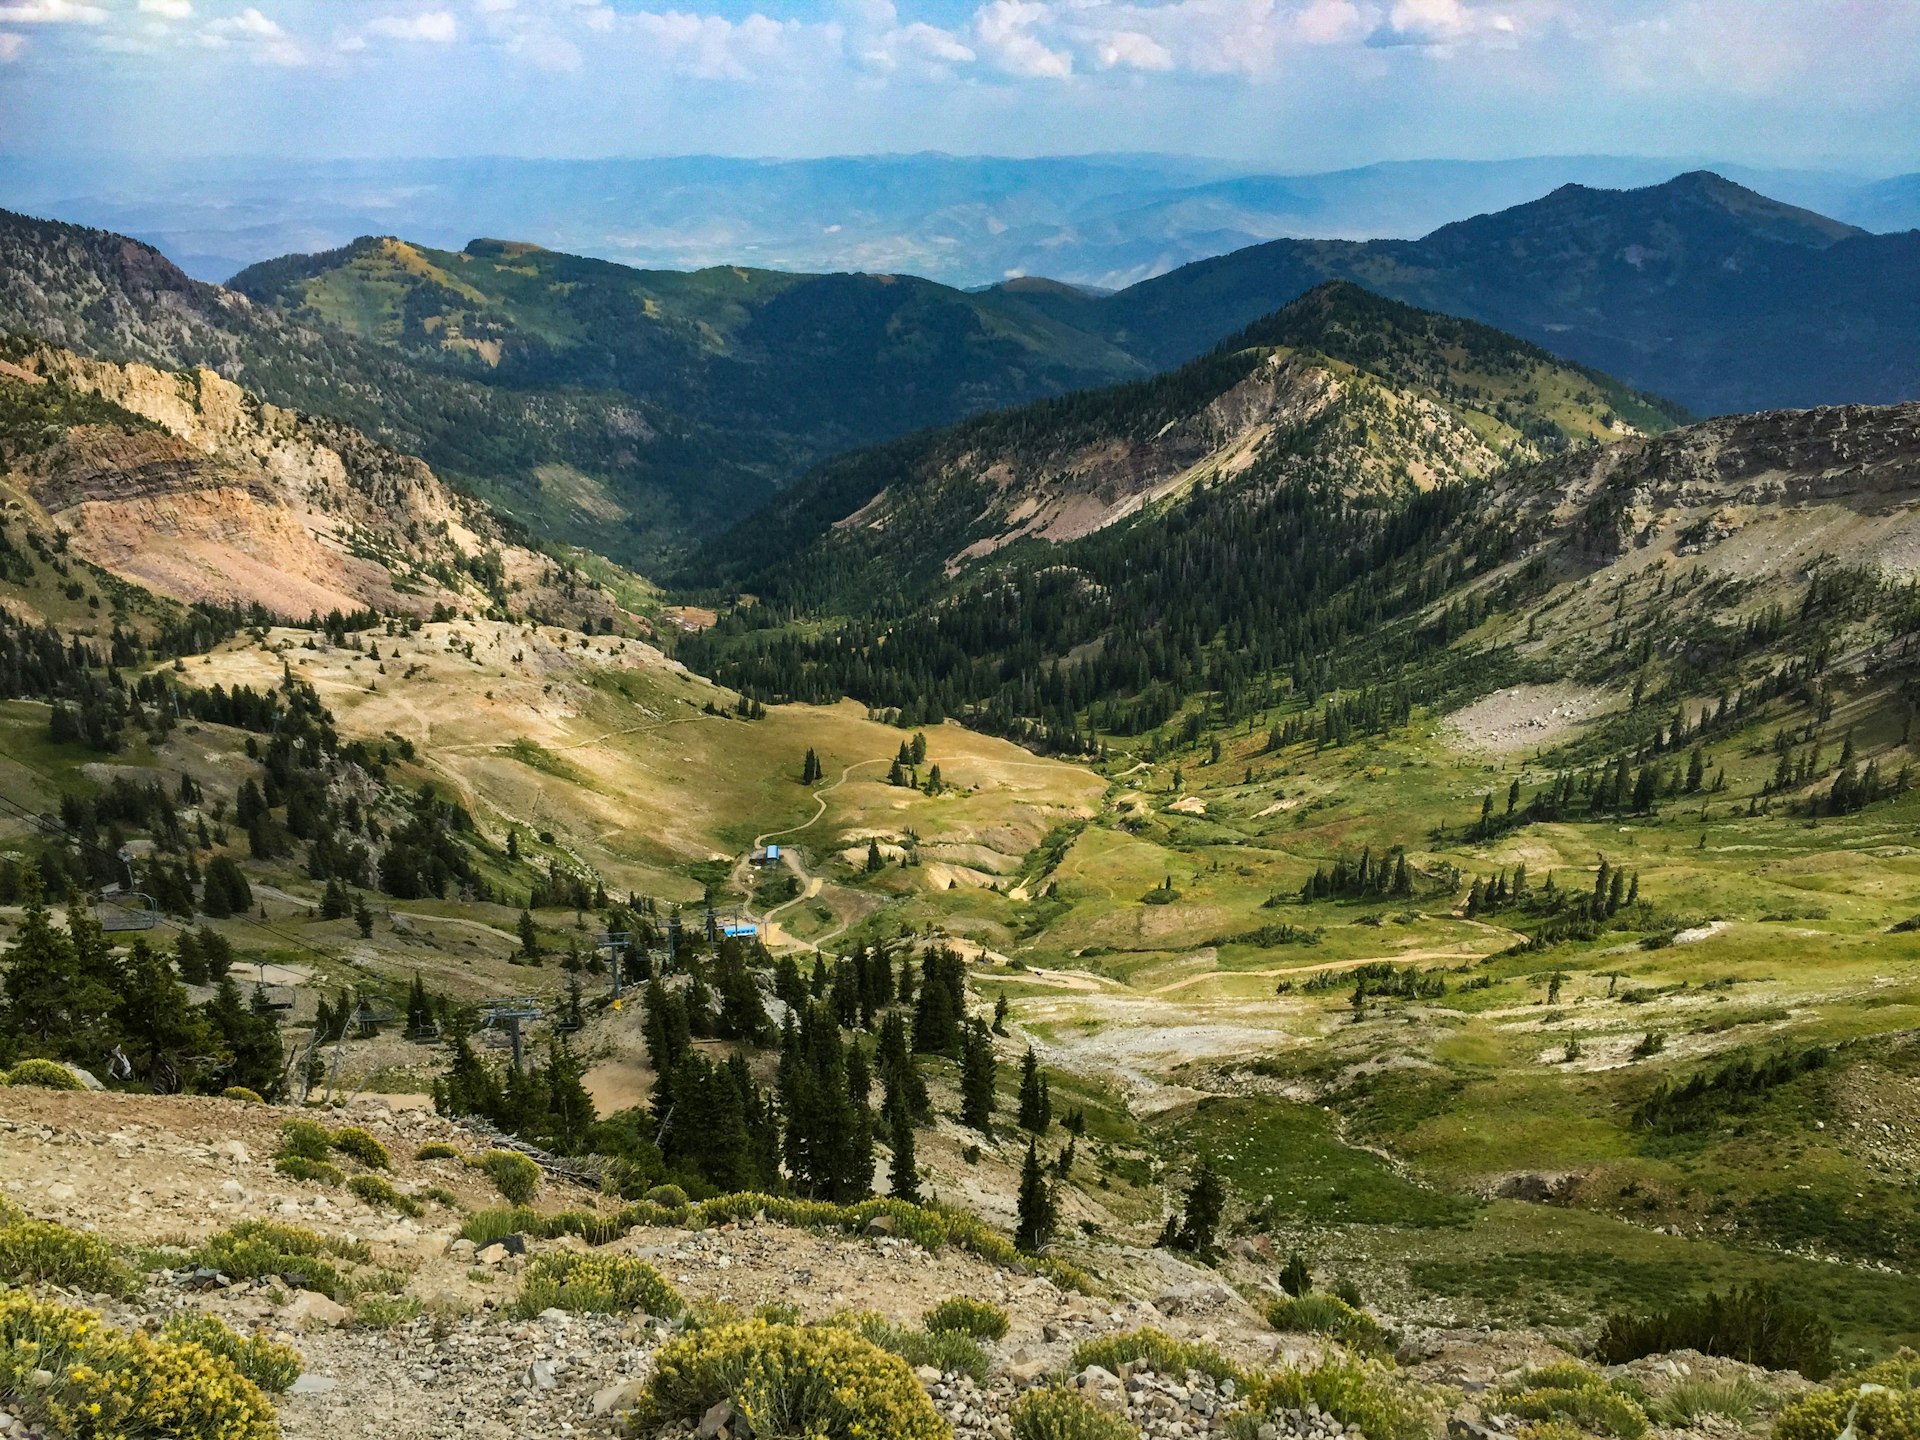 Just 40 minutes outside of town, the tram to Hidden Peak provides sweeping views of Salt Lake Valley. Image by Kerry Christiani / Lonely Planet